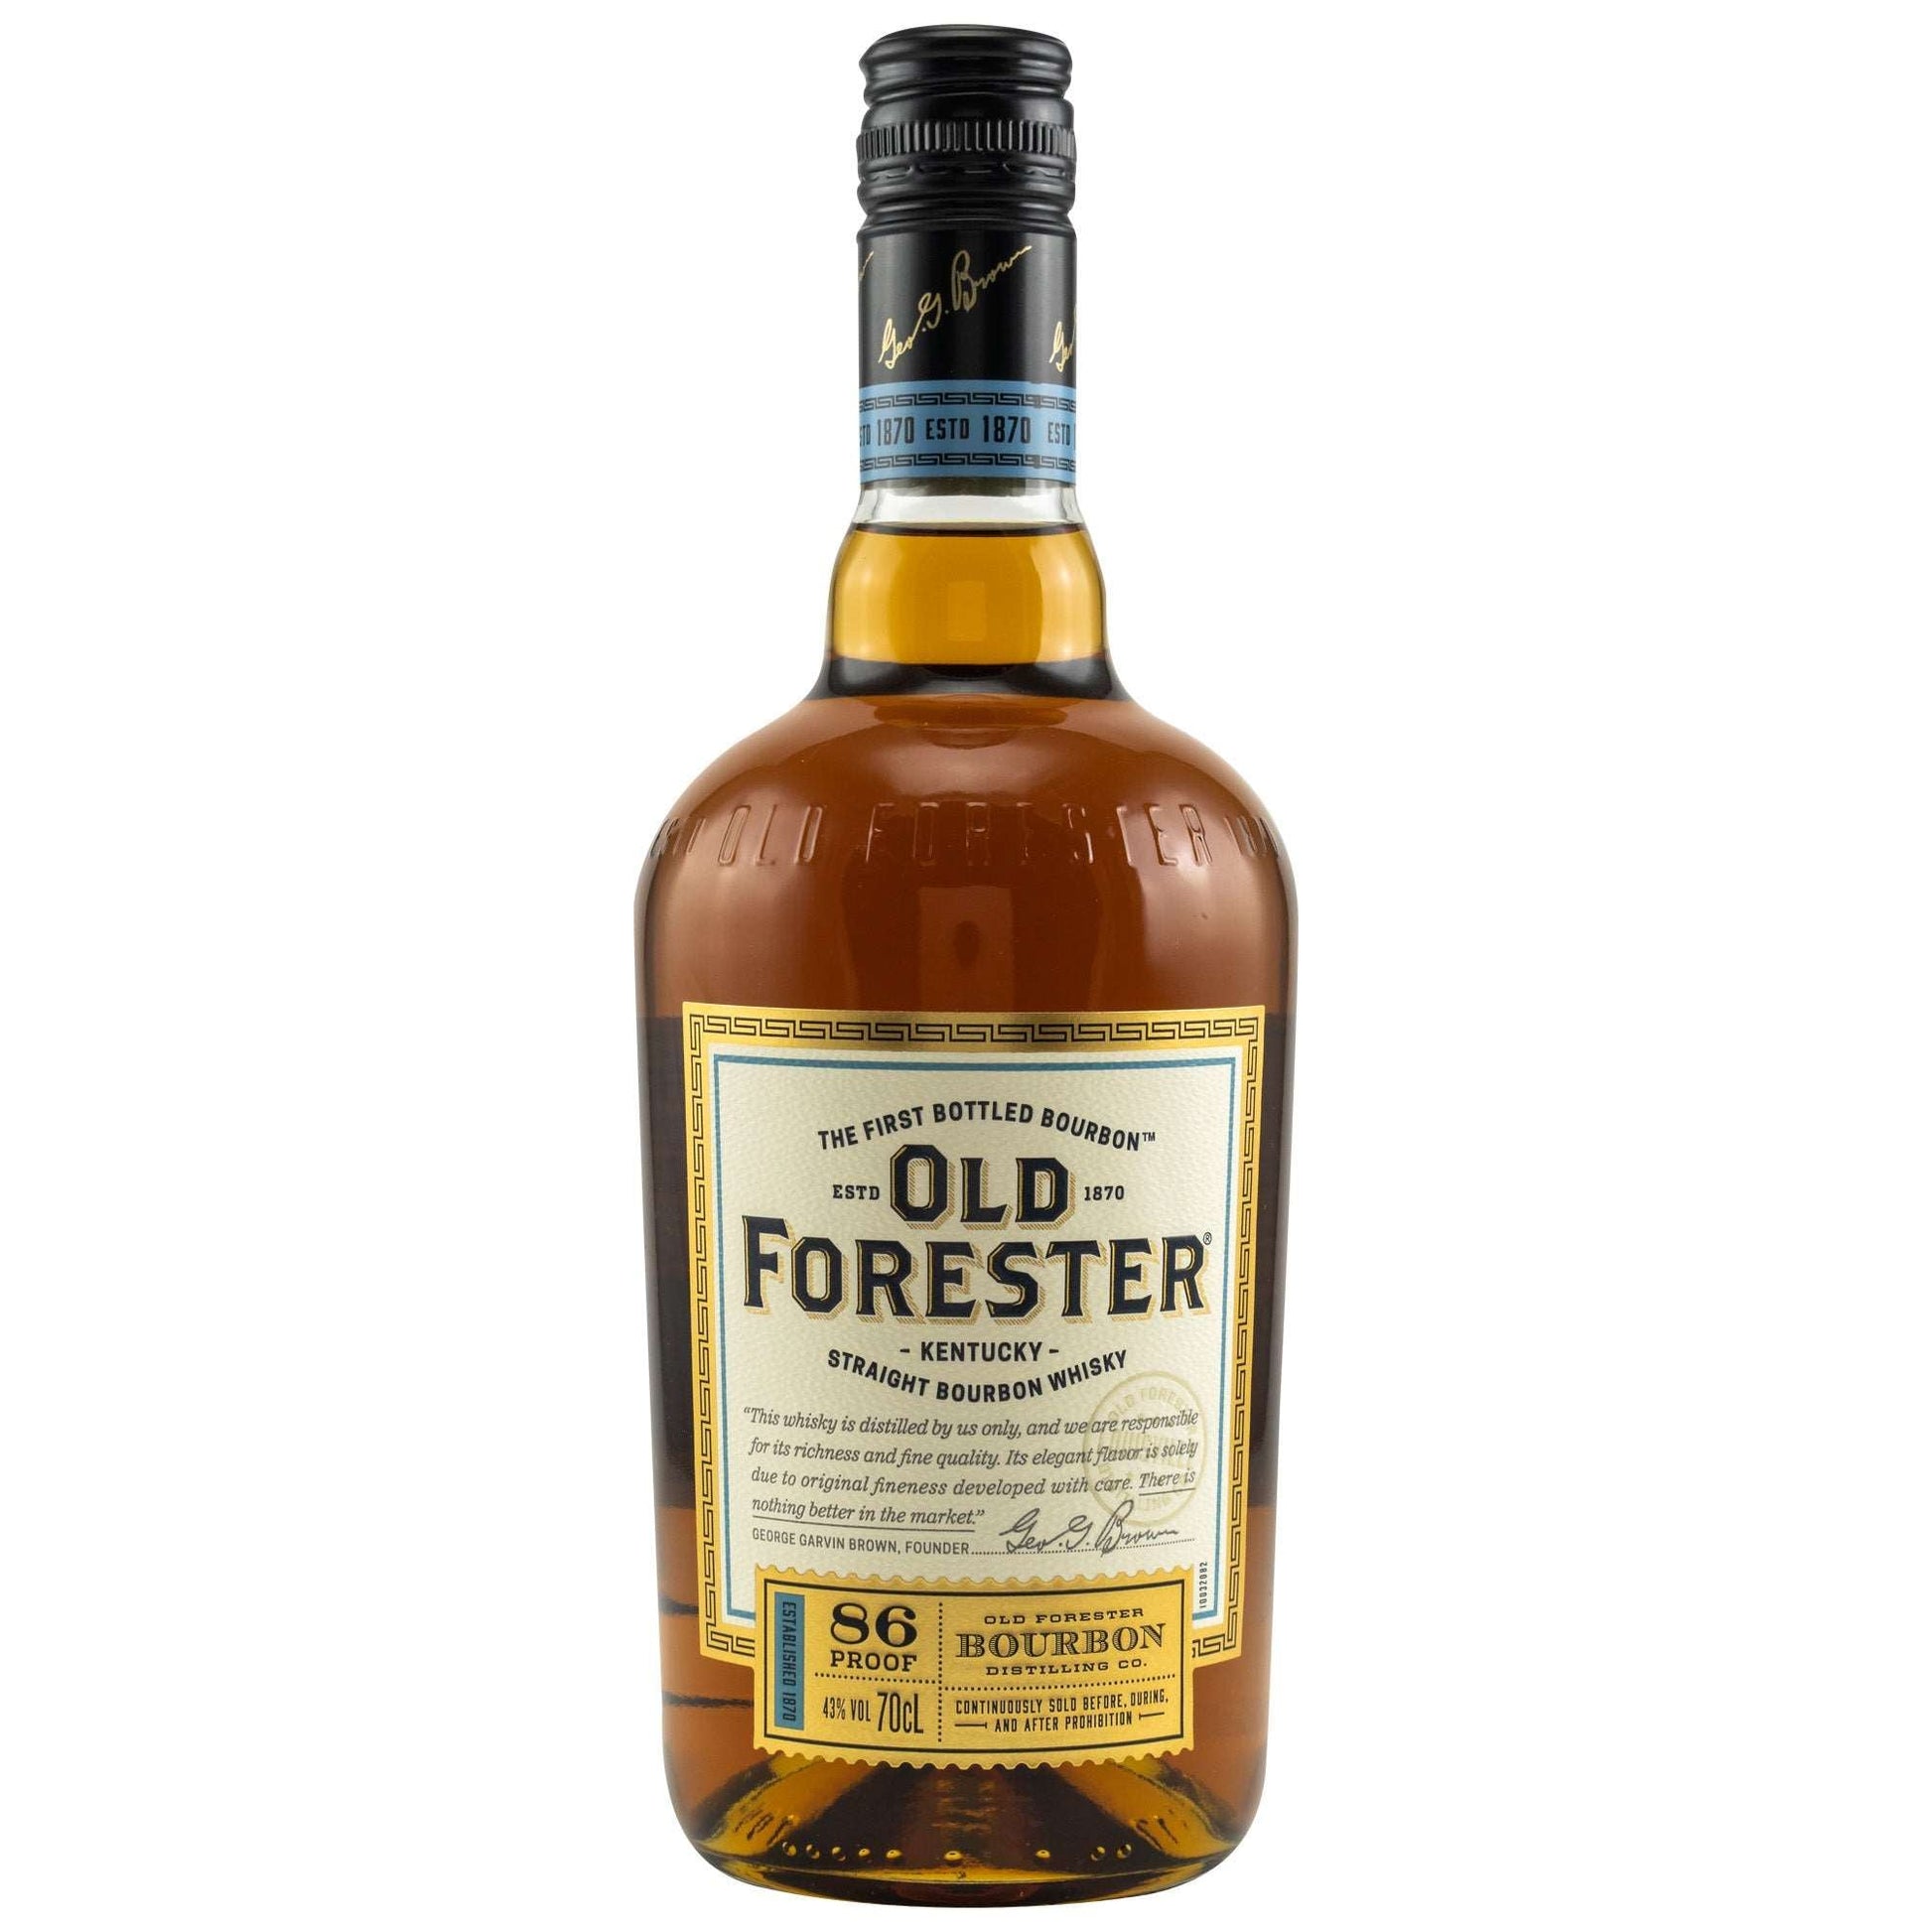 Old Forester | 86 Proof | Kentucky Straight Bourbon Whisky | 0,7l | 43%GET A BOTTLE